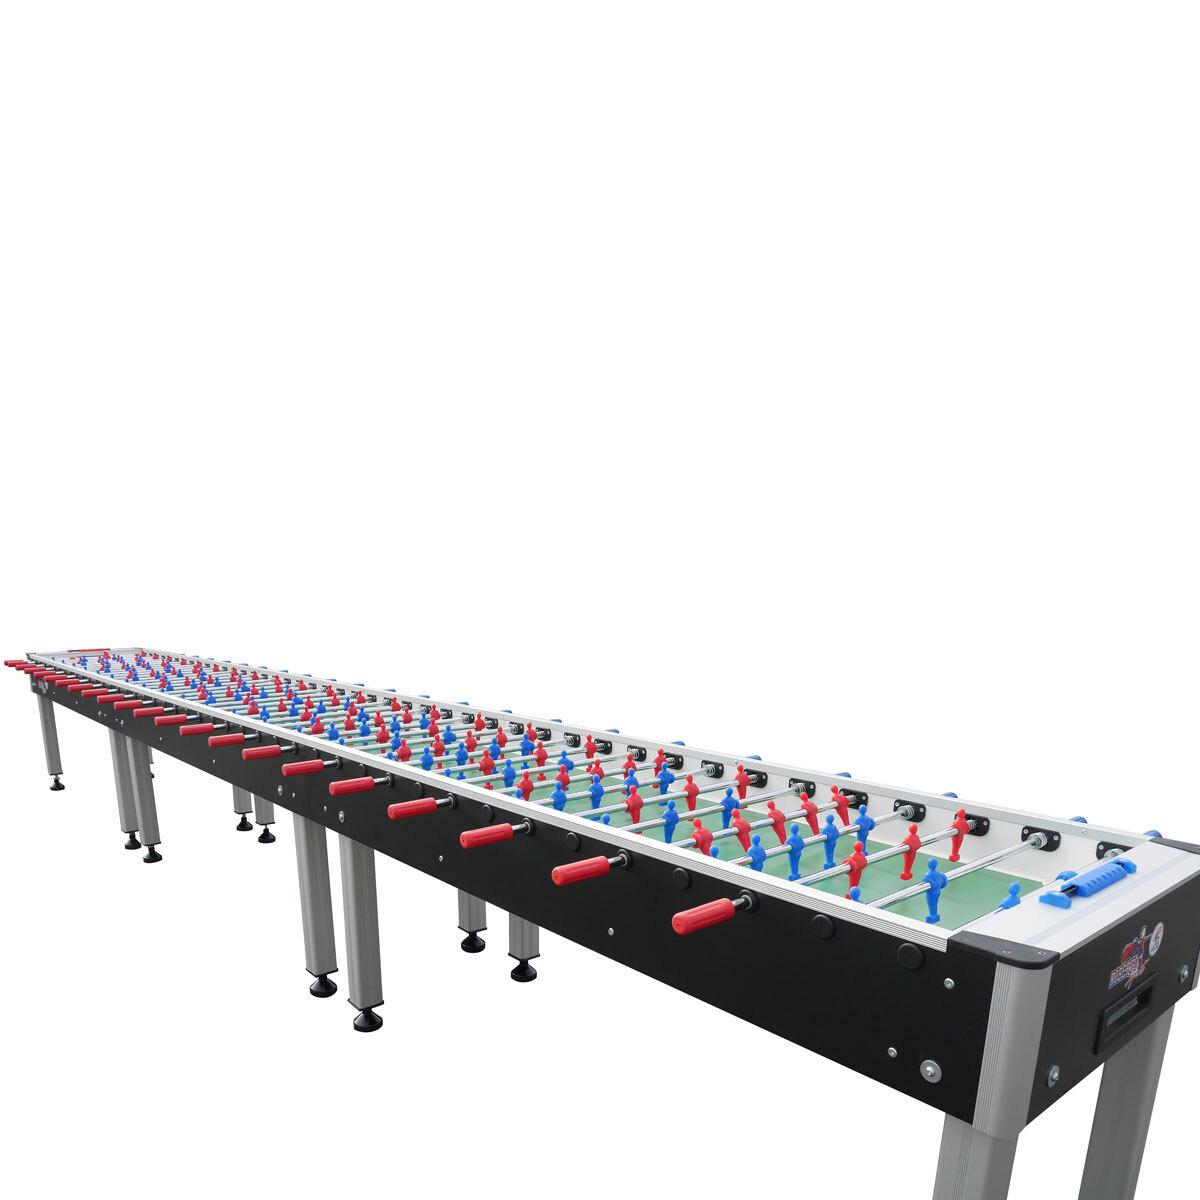 College 11 x 11 football table